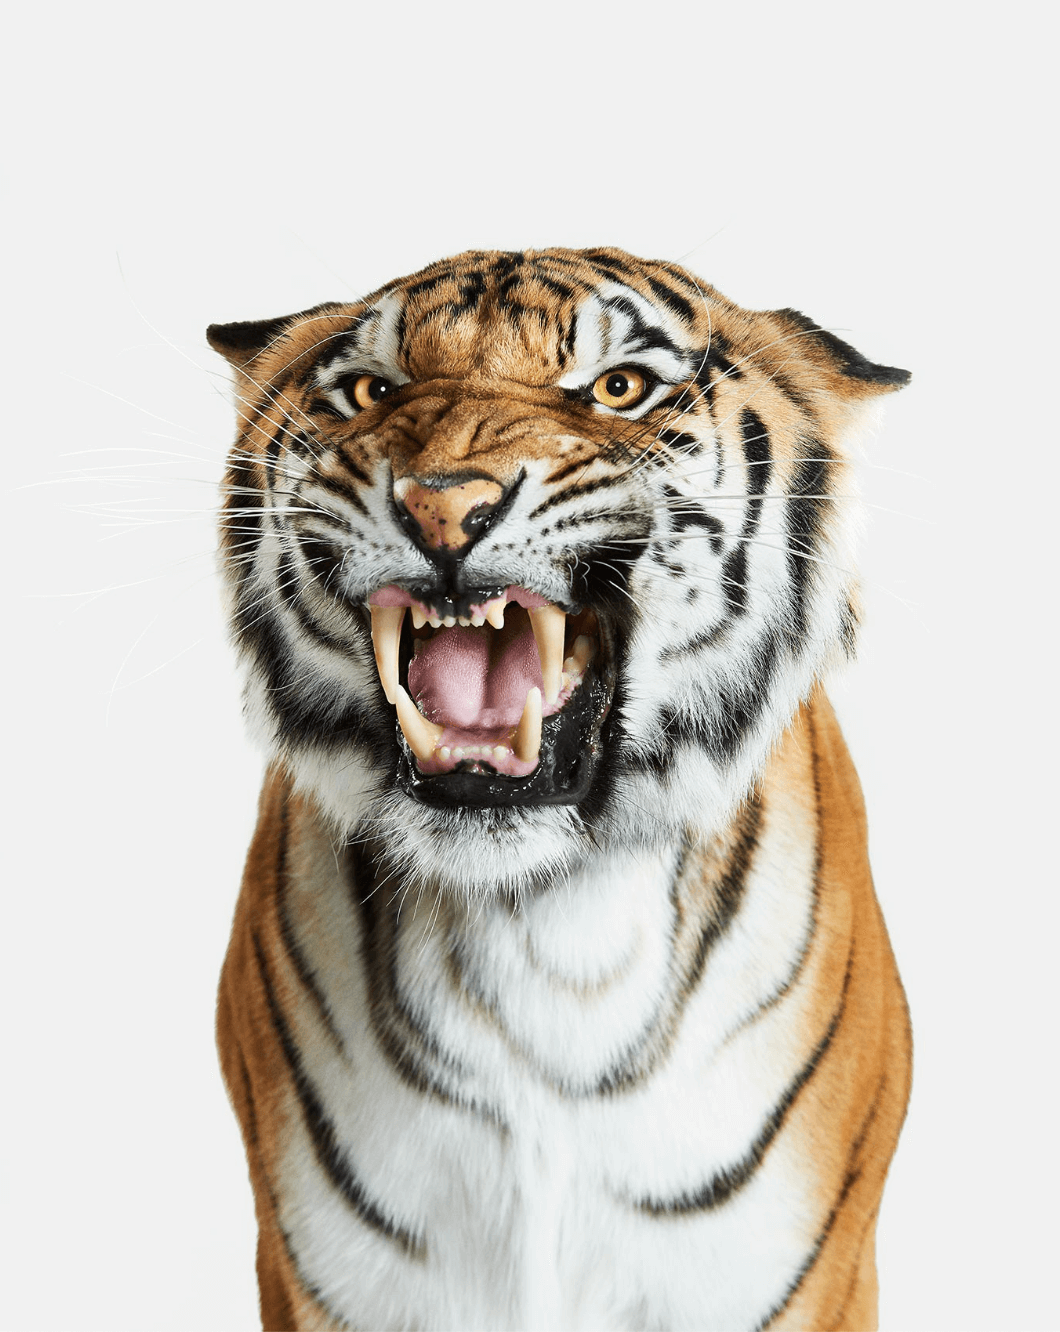 Tiger photographed by 